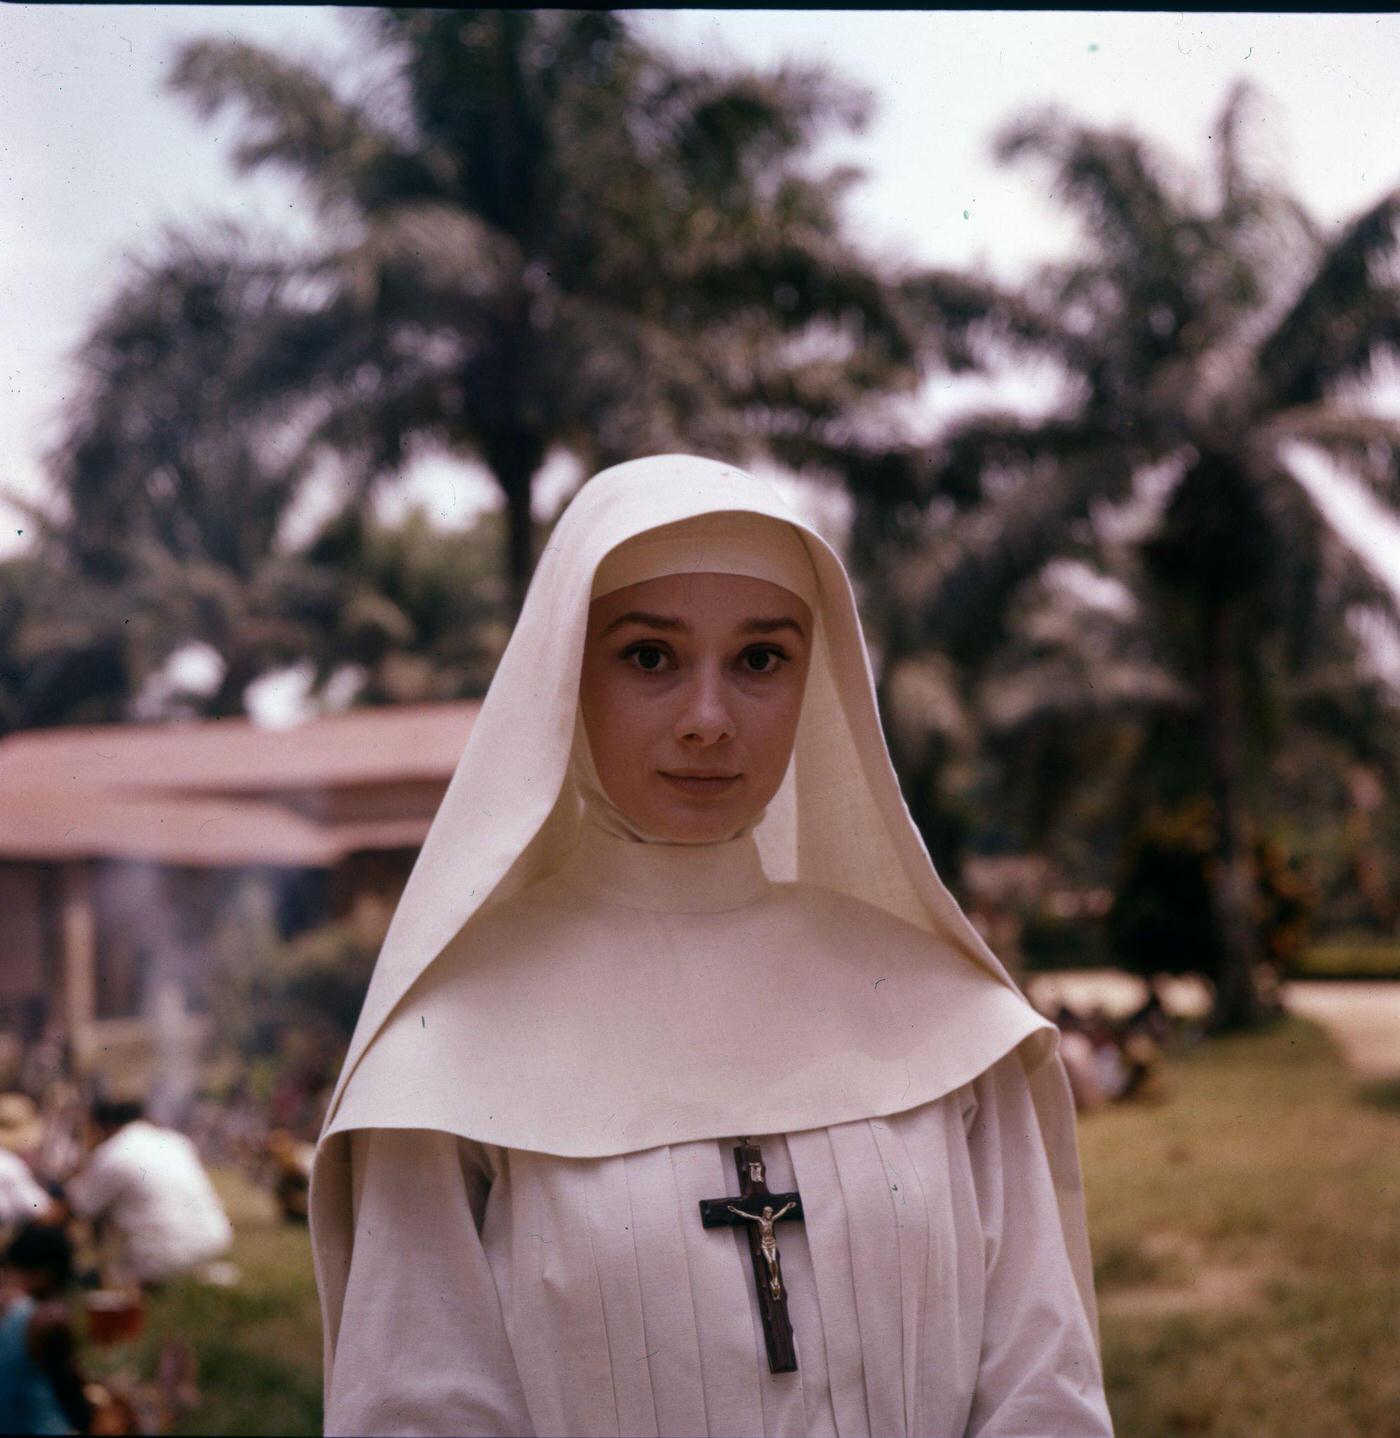 Actress Audrey Hepburn on the set of "The Nun's Story" in the Republic of Congo, 1958.